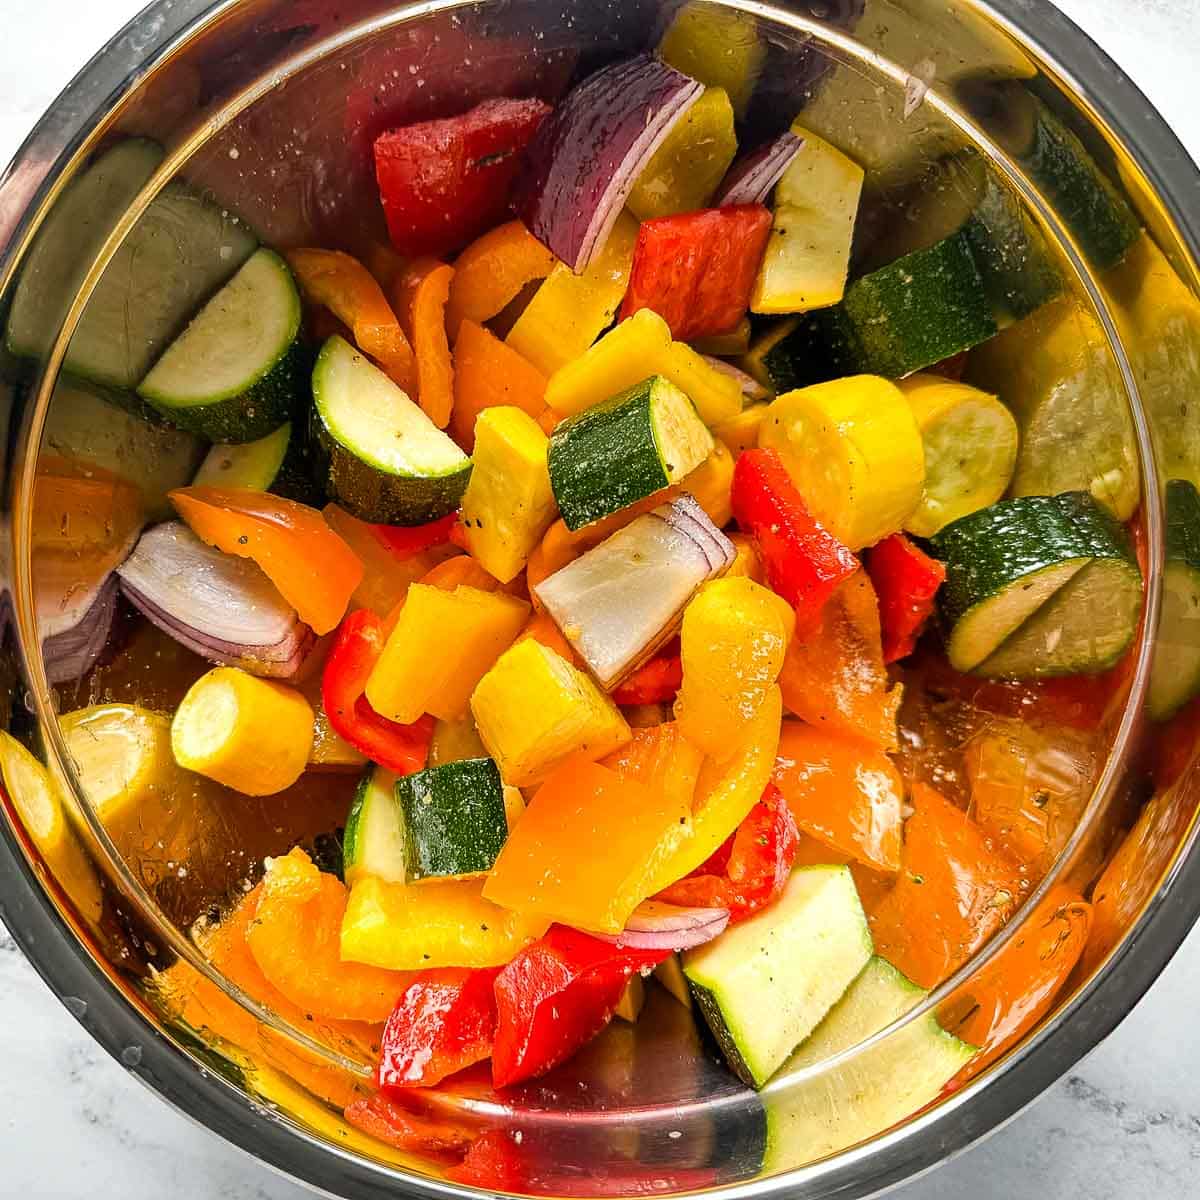 Cut vegetables tossed with olive oil and seasonings in a stainless steel bowl.